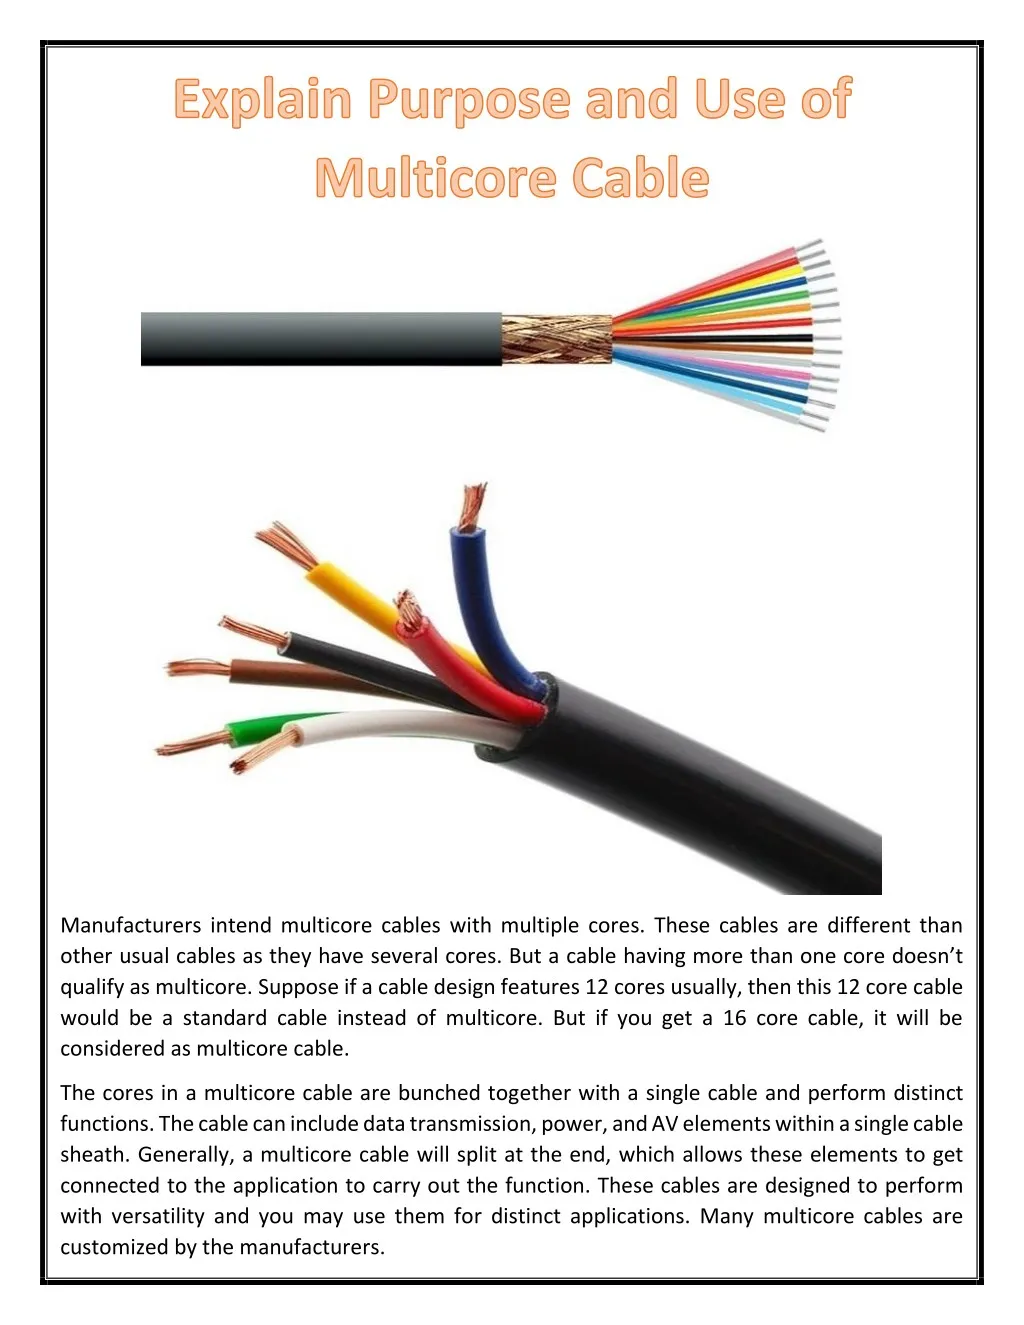 manufacturers intend multicore cables with